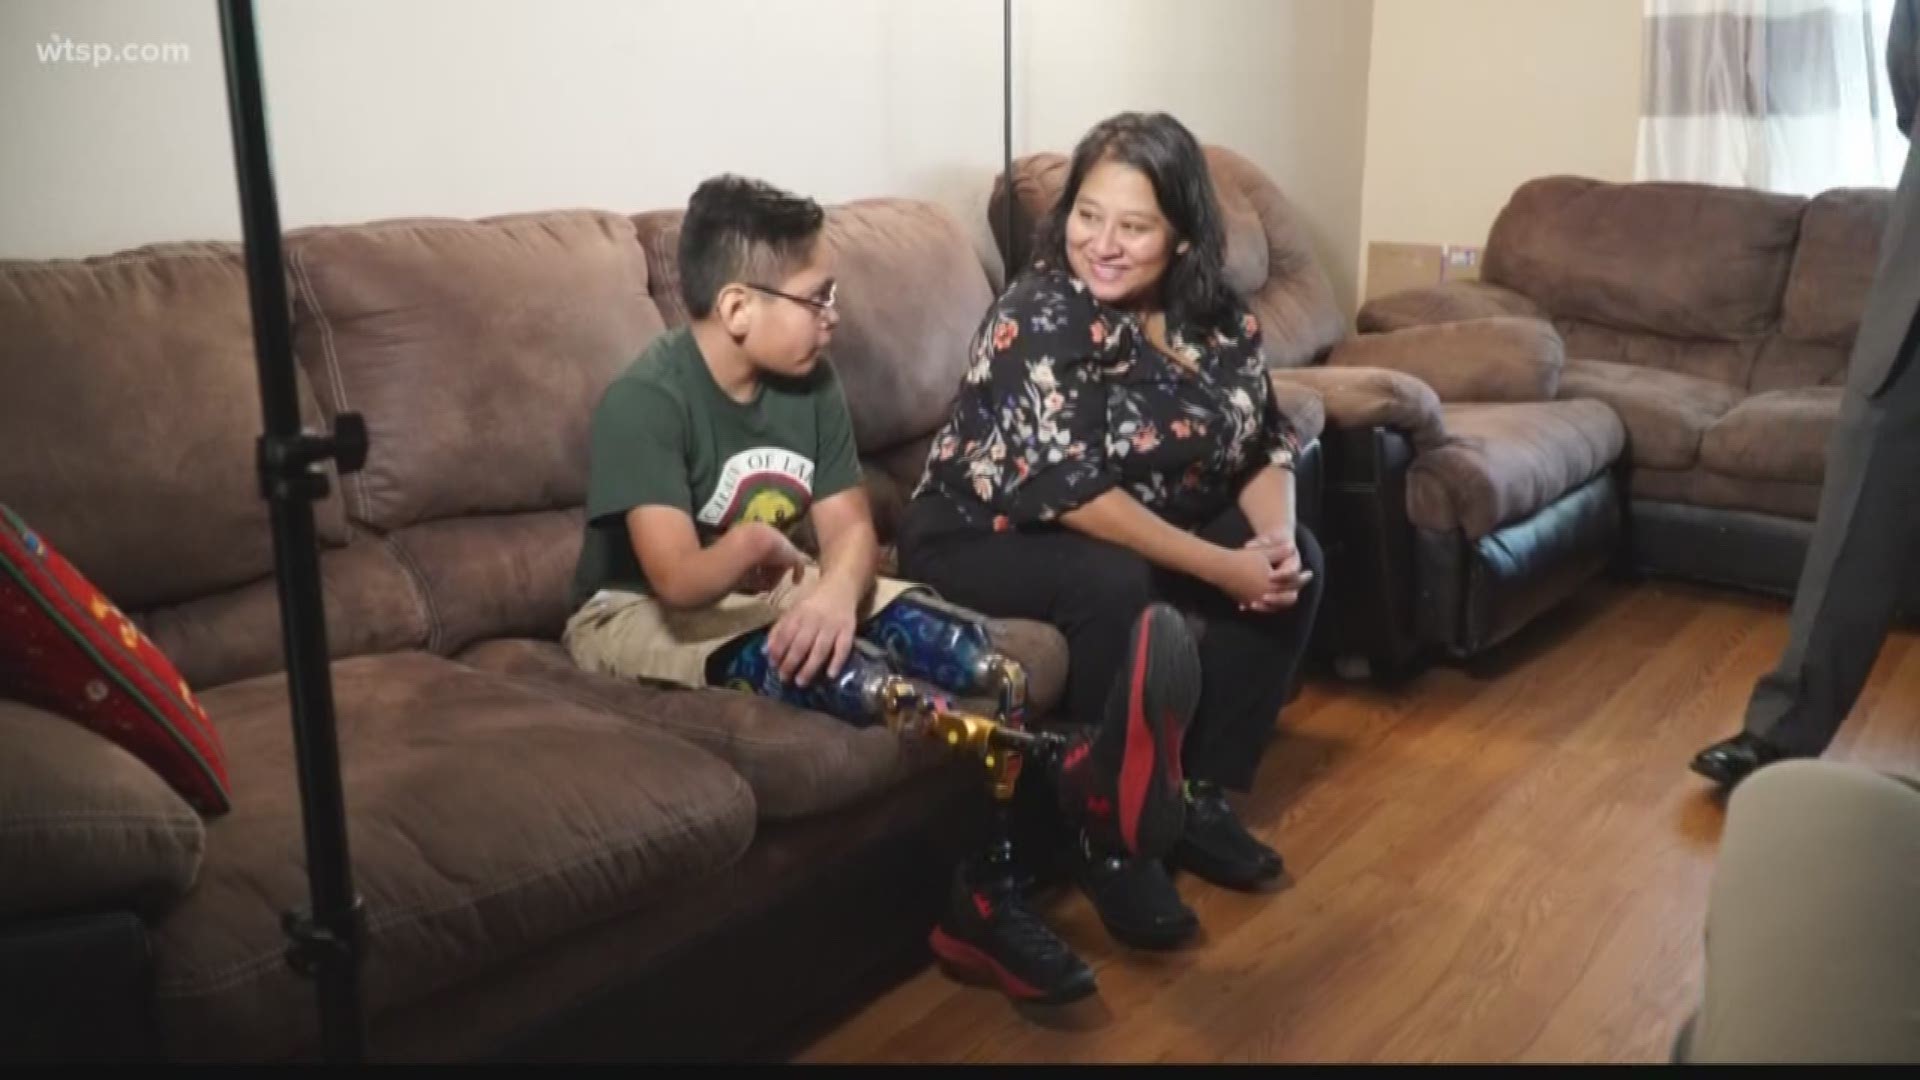 He says park employees kept changing their minds about whether he could ride some rollercoasters. His mom says that made him feel like he was different.